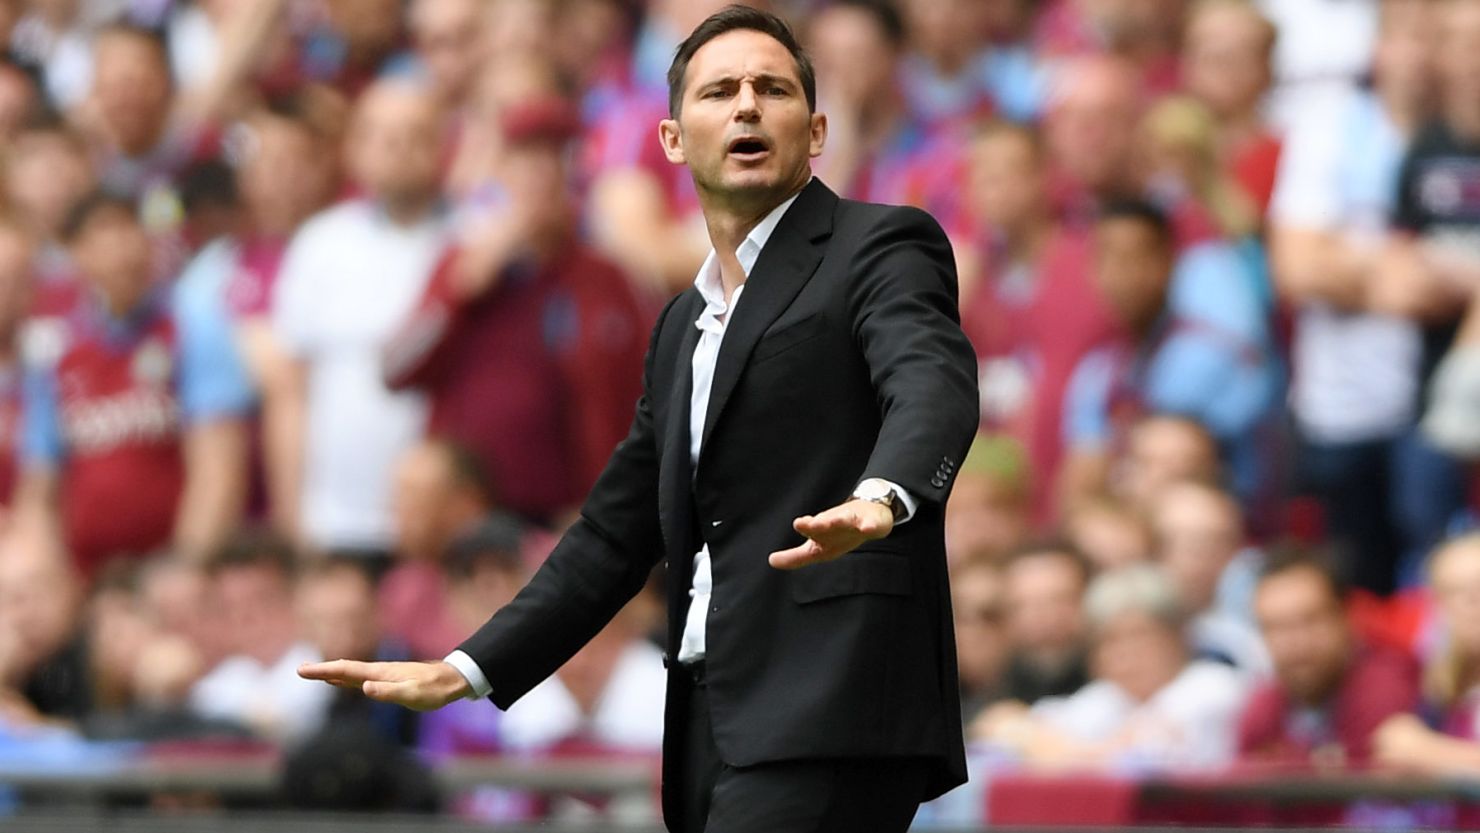 Derby County reached the Championship playoff finals under Lampard.